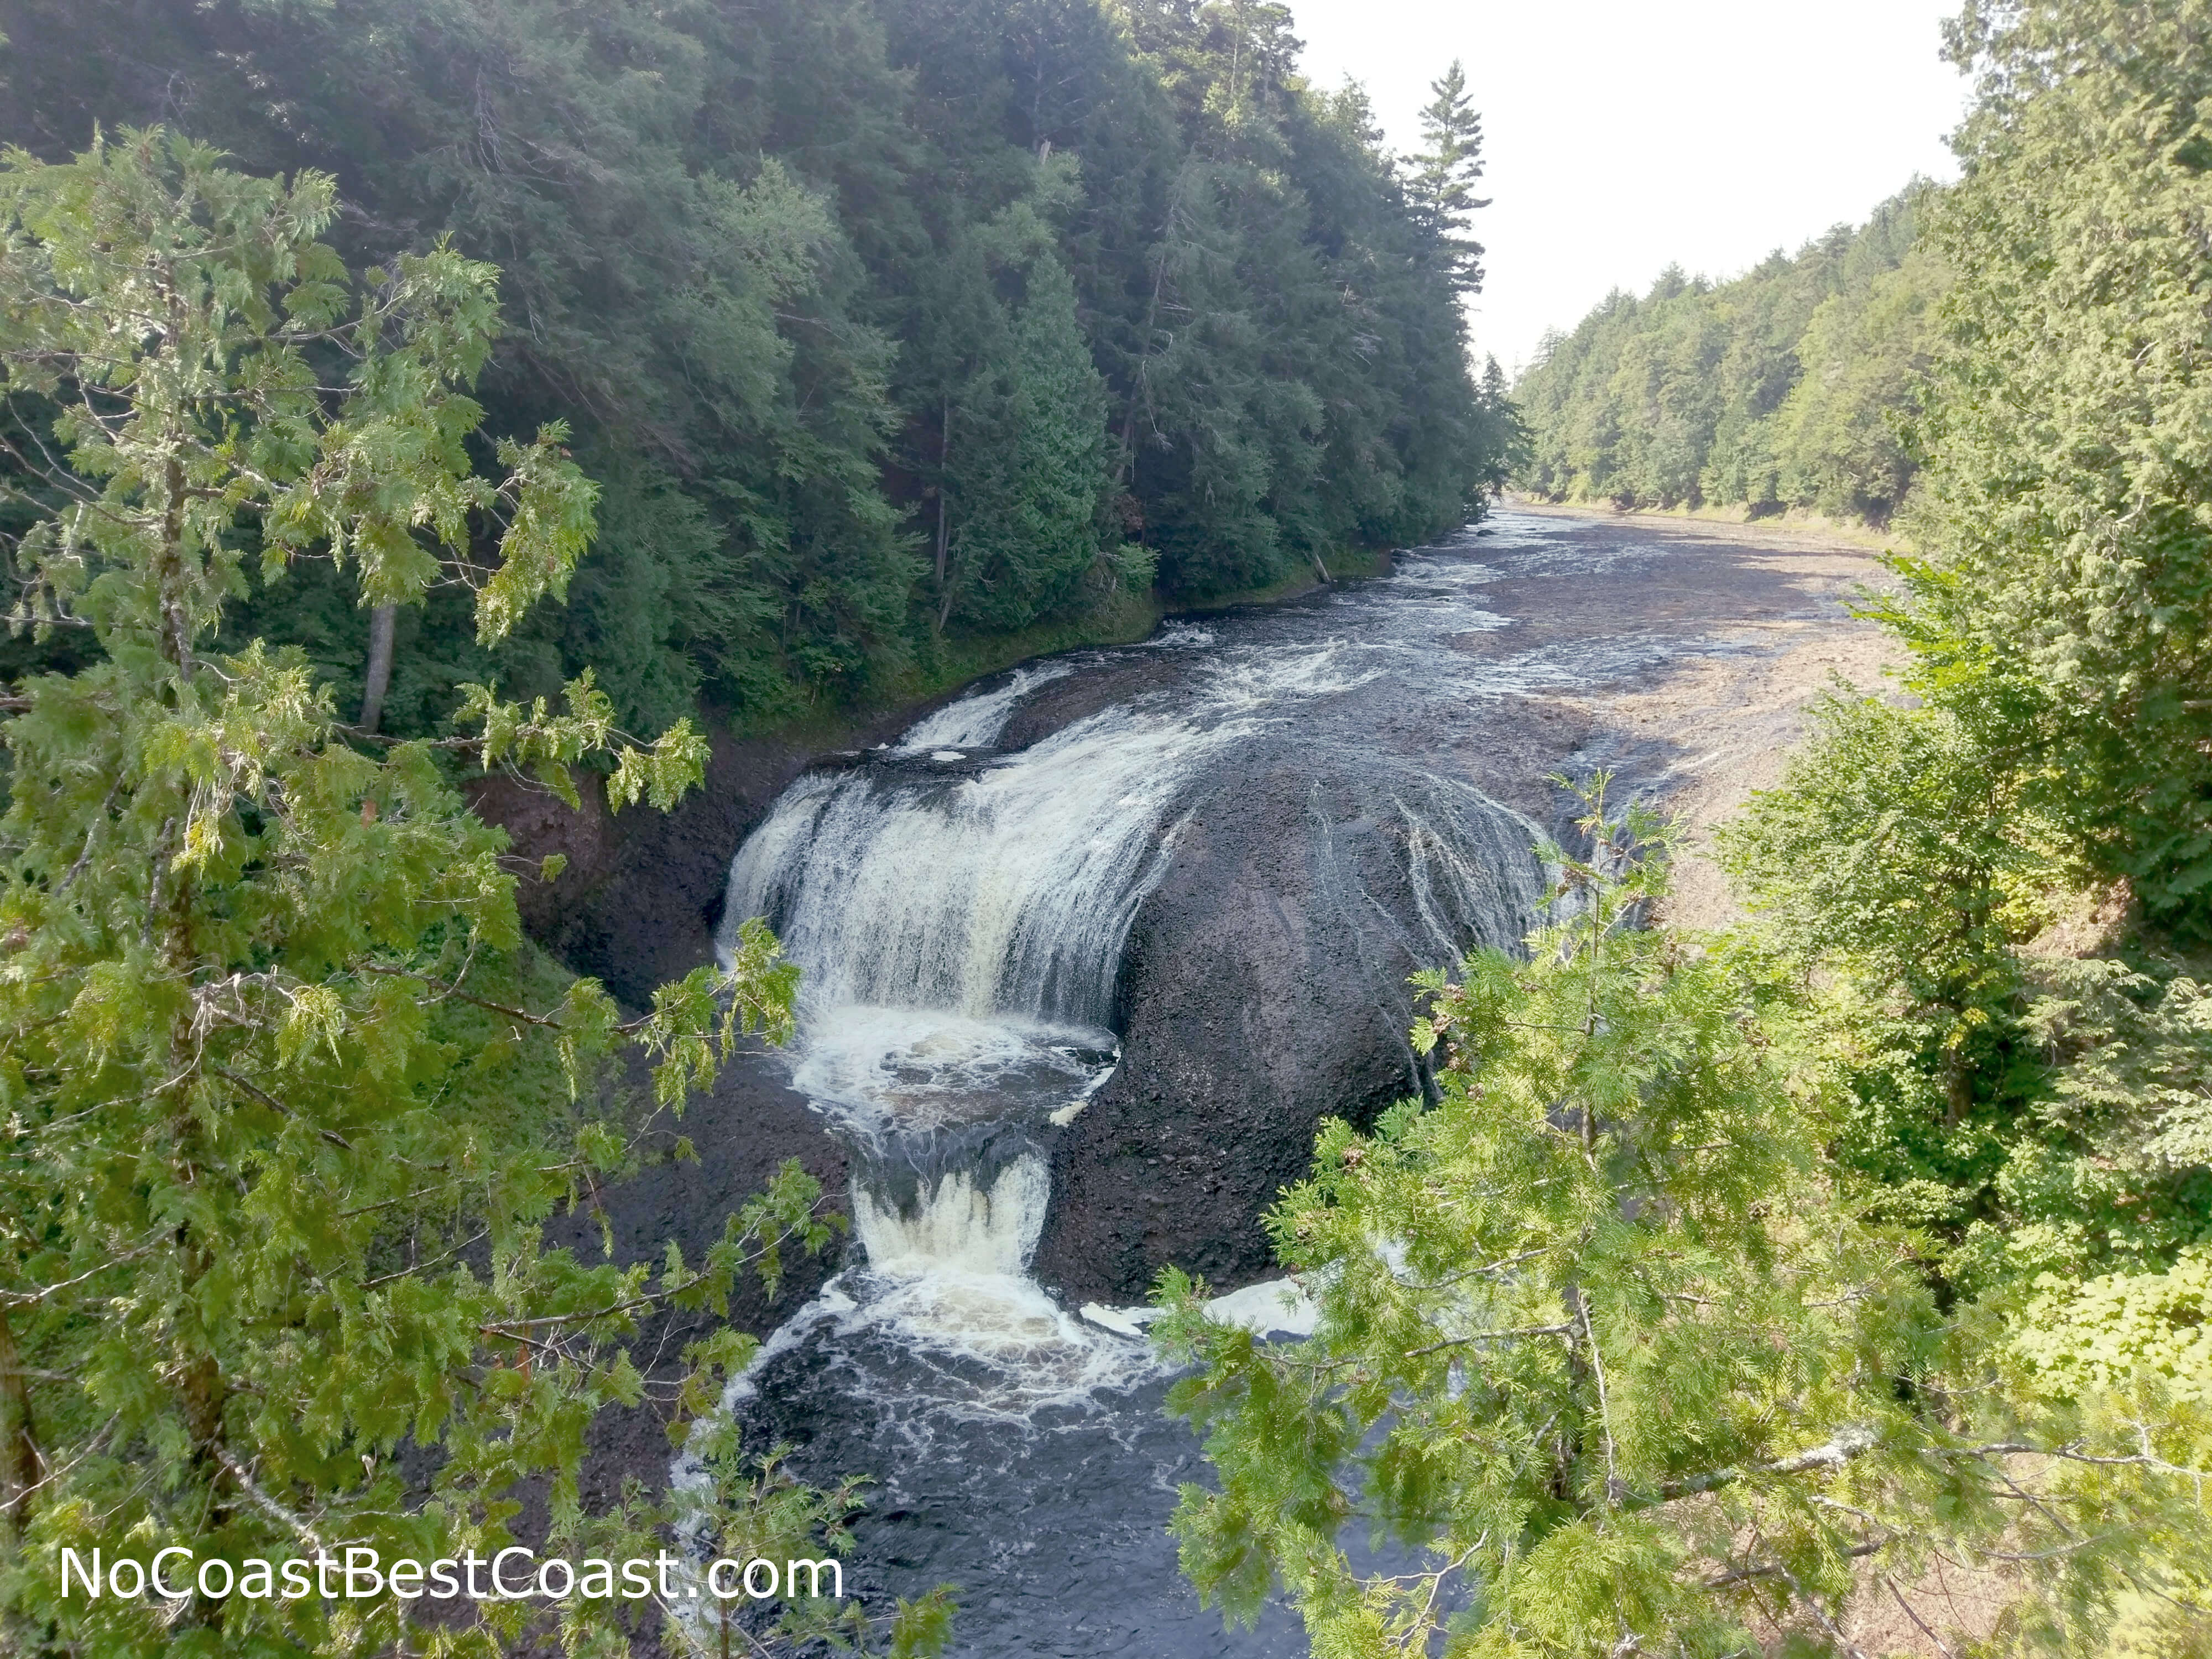 The mighty two-tiered Potawatomi Falls